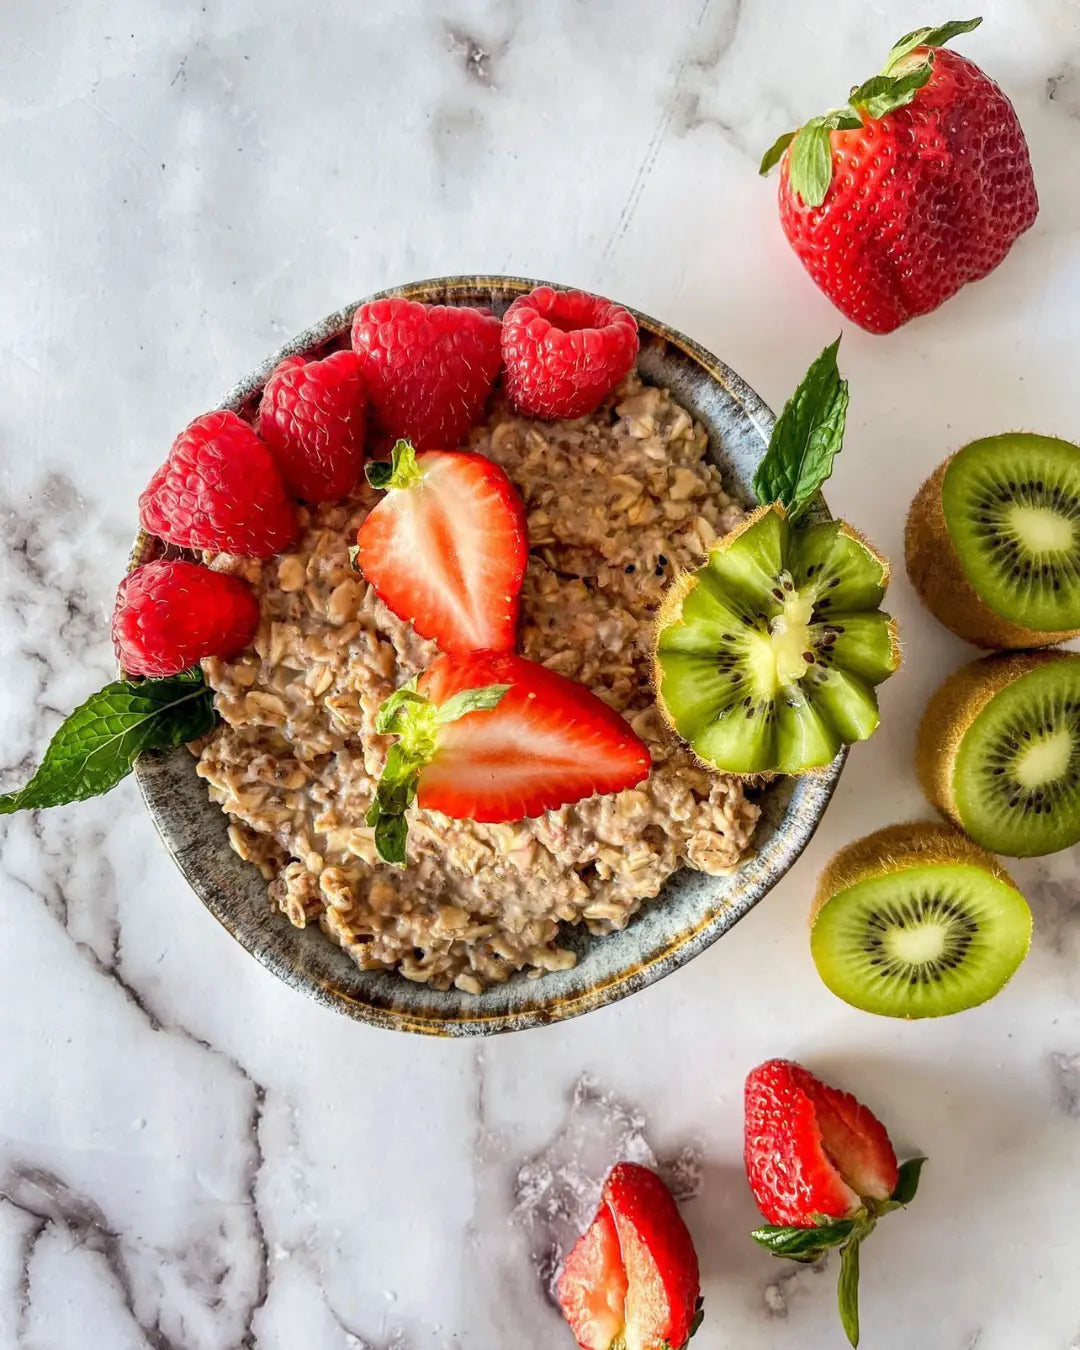 Raspberry instant oatmeal in a bowl with fresh strawberries and kiwis. 